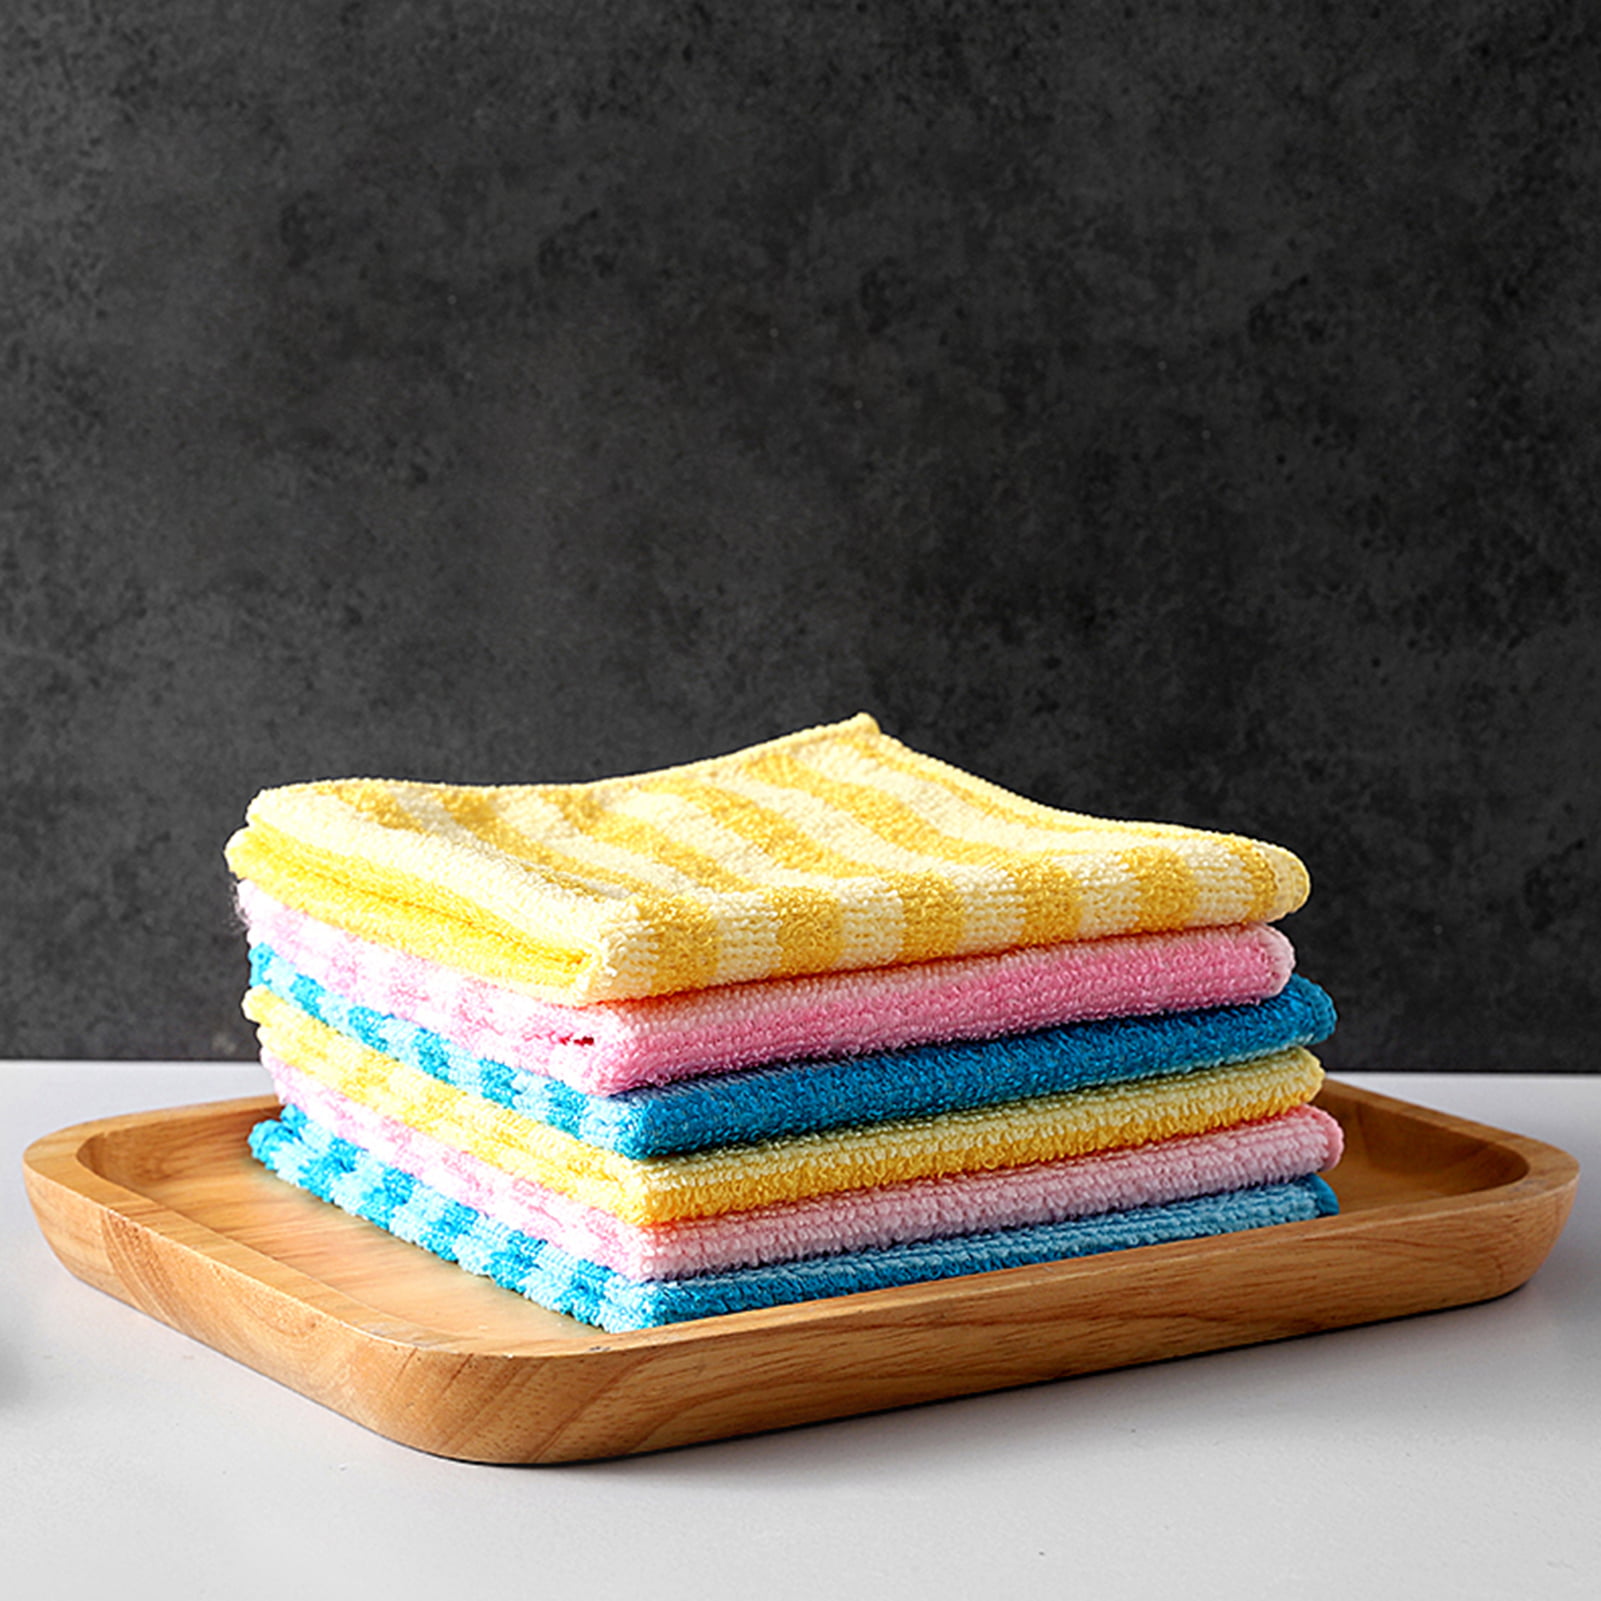 KUNGUGU Limei Dish Cloths for Washing Dishes - Lint Free Kitchen Dishcloth Small Microfiber Dish Towel Rags Absorbent Reusable Cleaning Drainer Washcloths